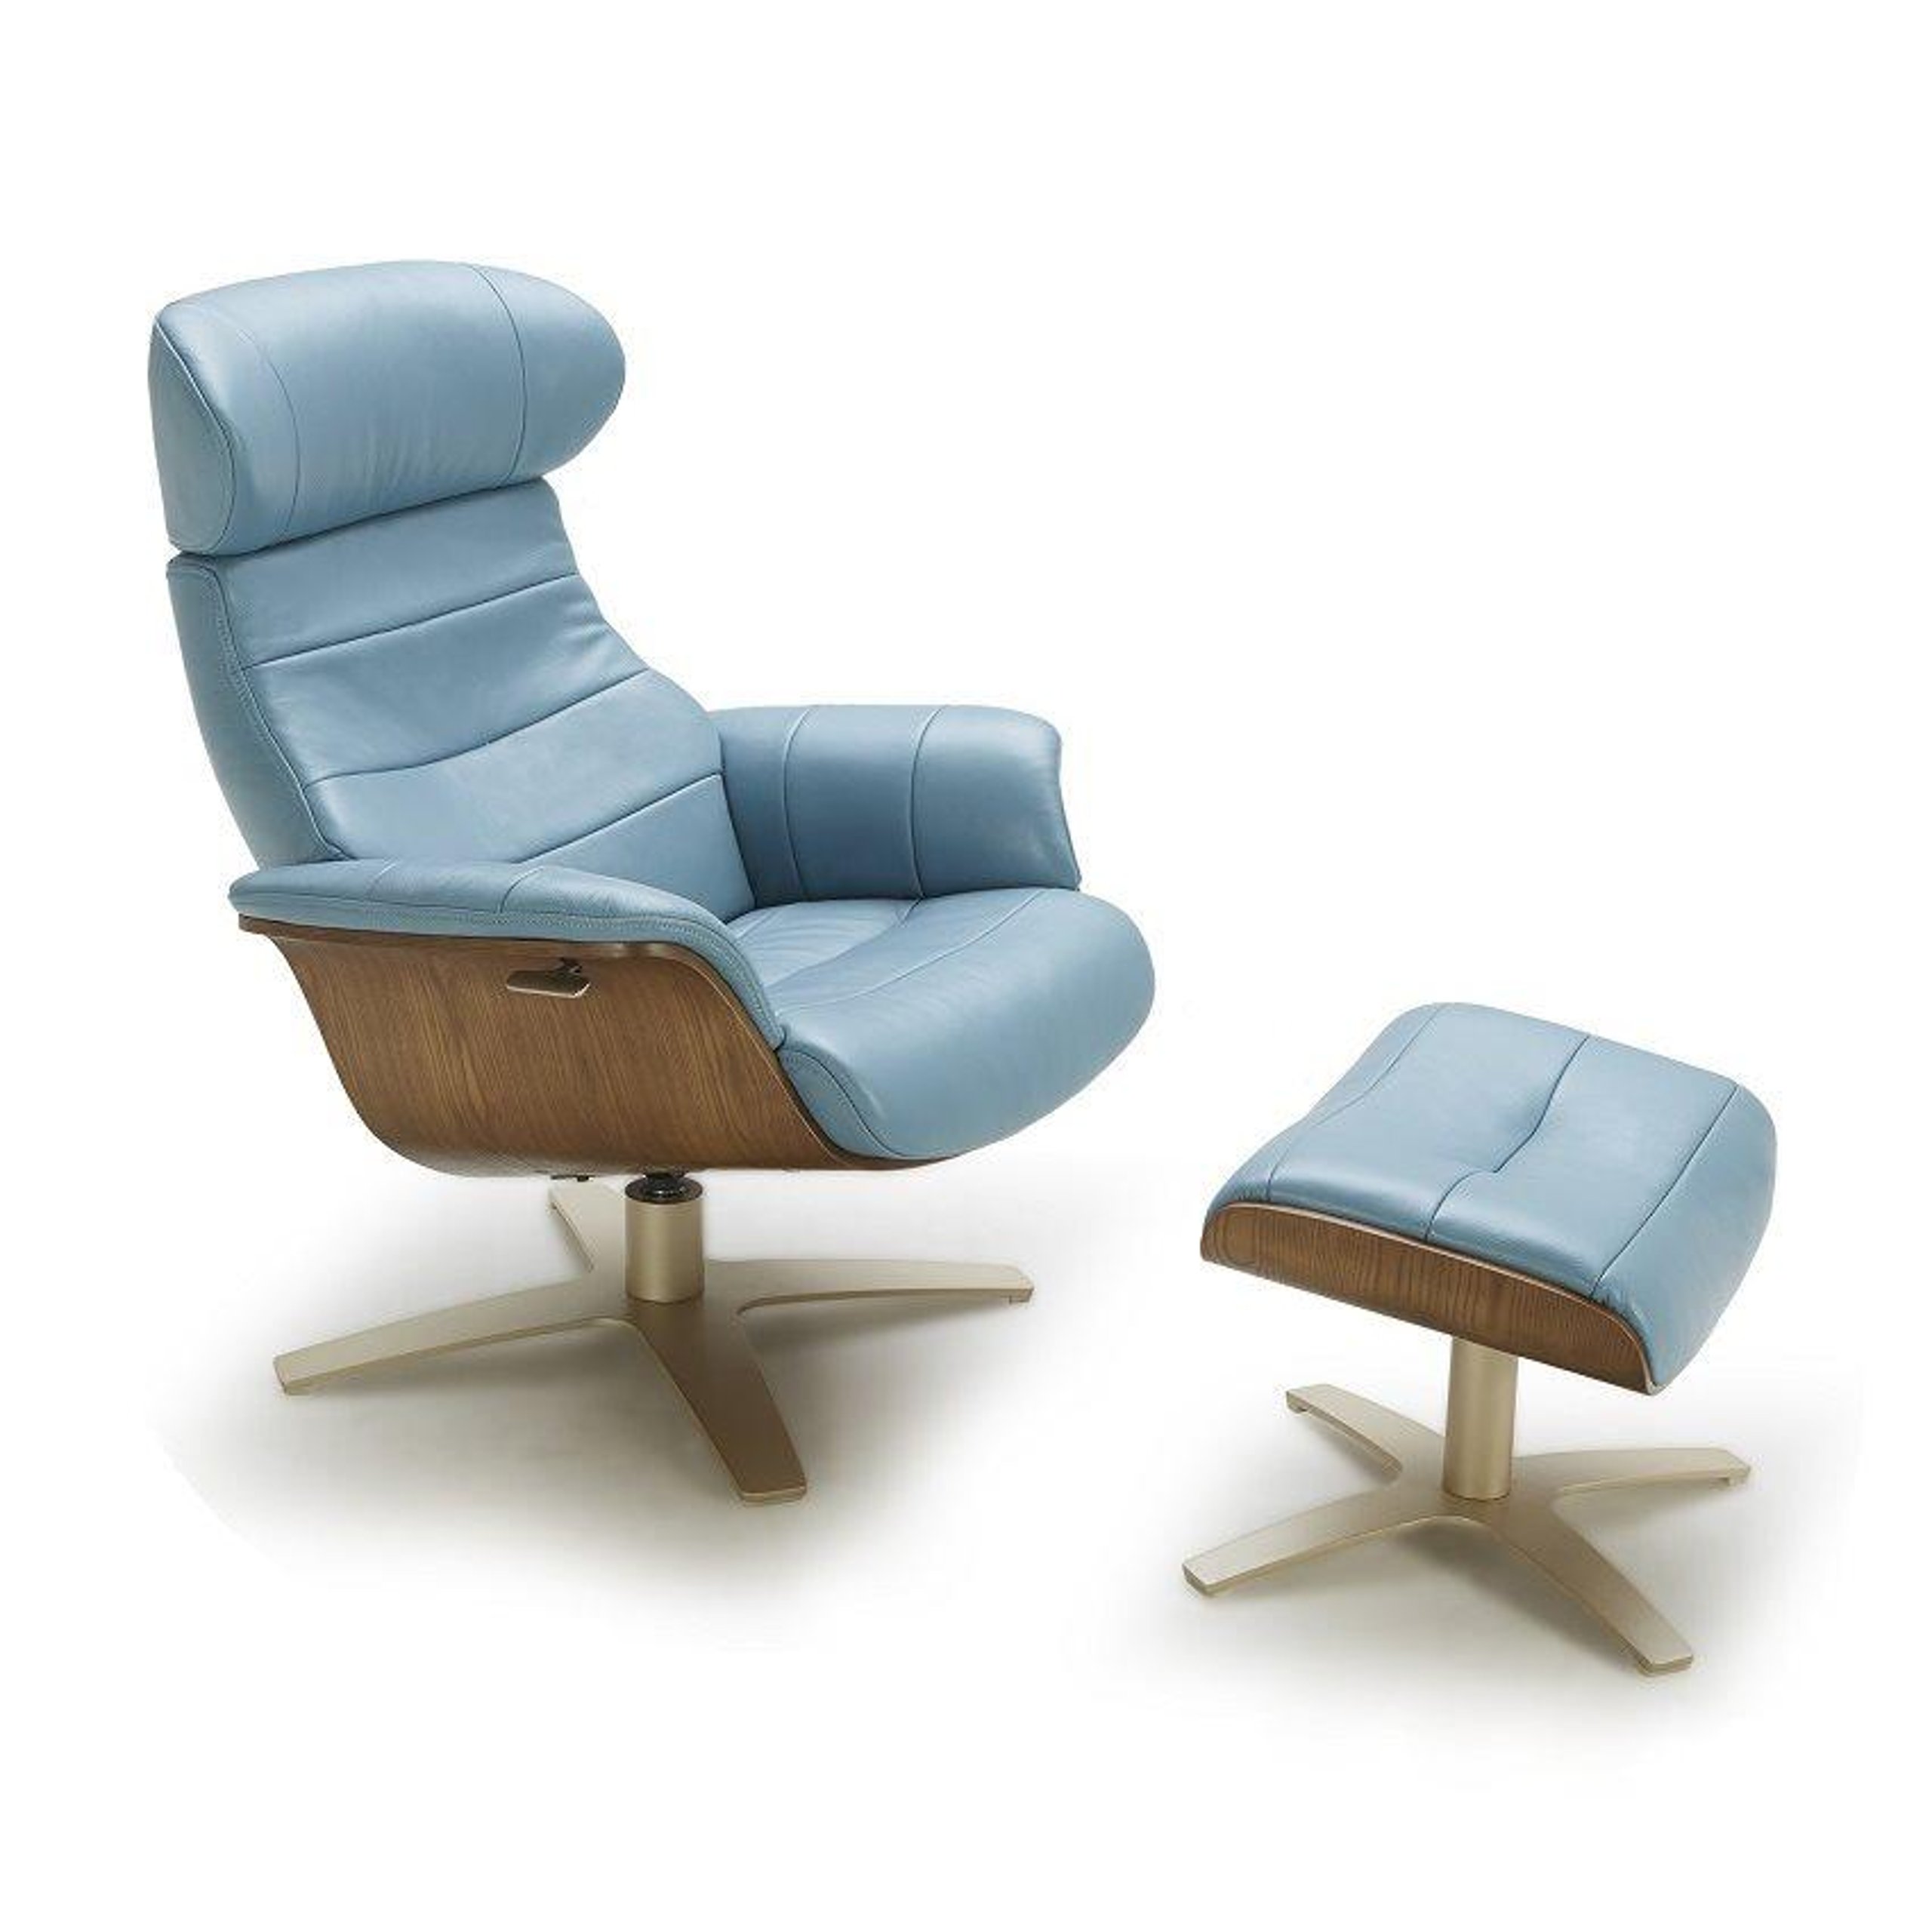 Best deal for J&M Karma Lounge Chair 2 Pcs in Light Blue, Leather $2,604.07